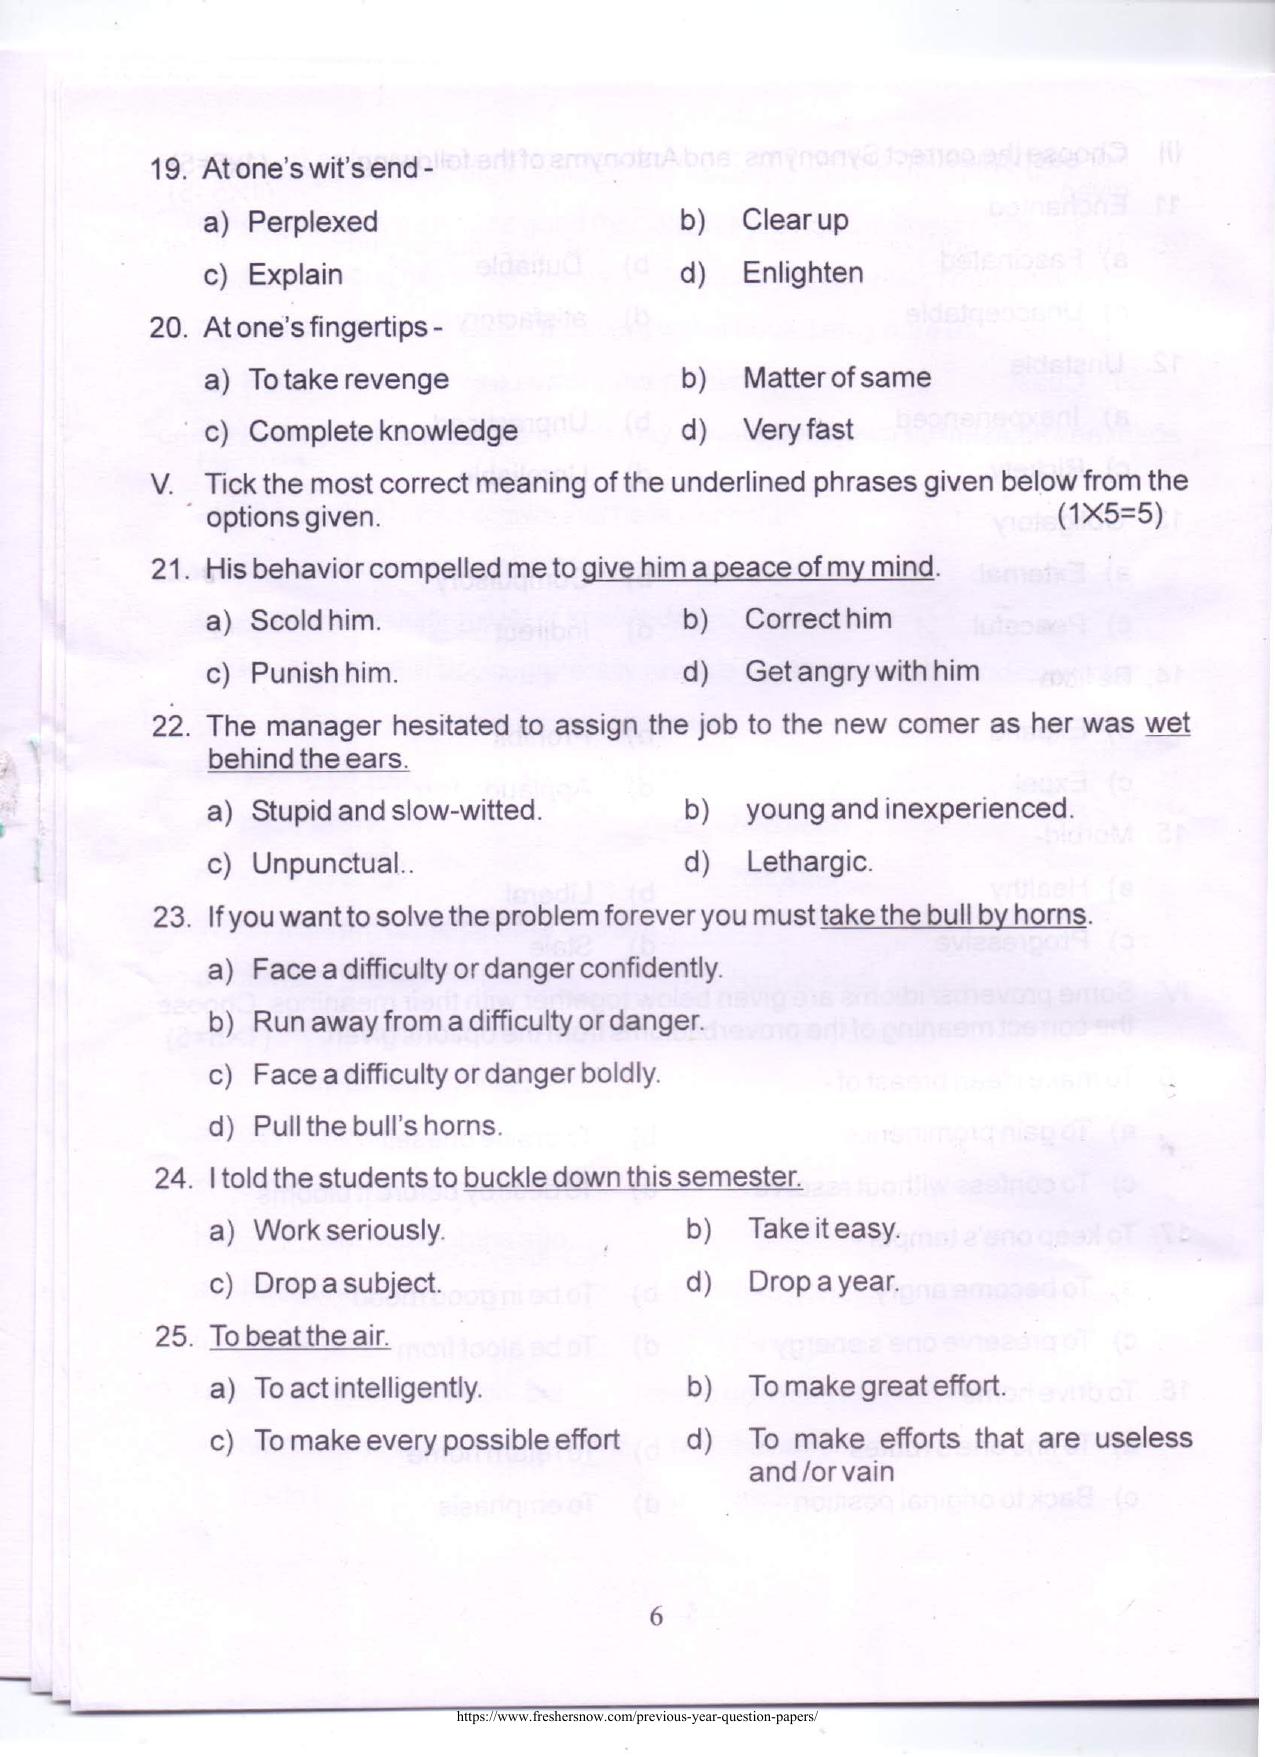 PDF Download Of SPSC MPHW General English & General Knowledge Previous Papers - Page 5